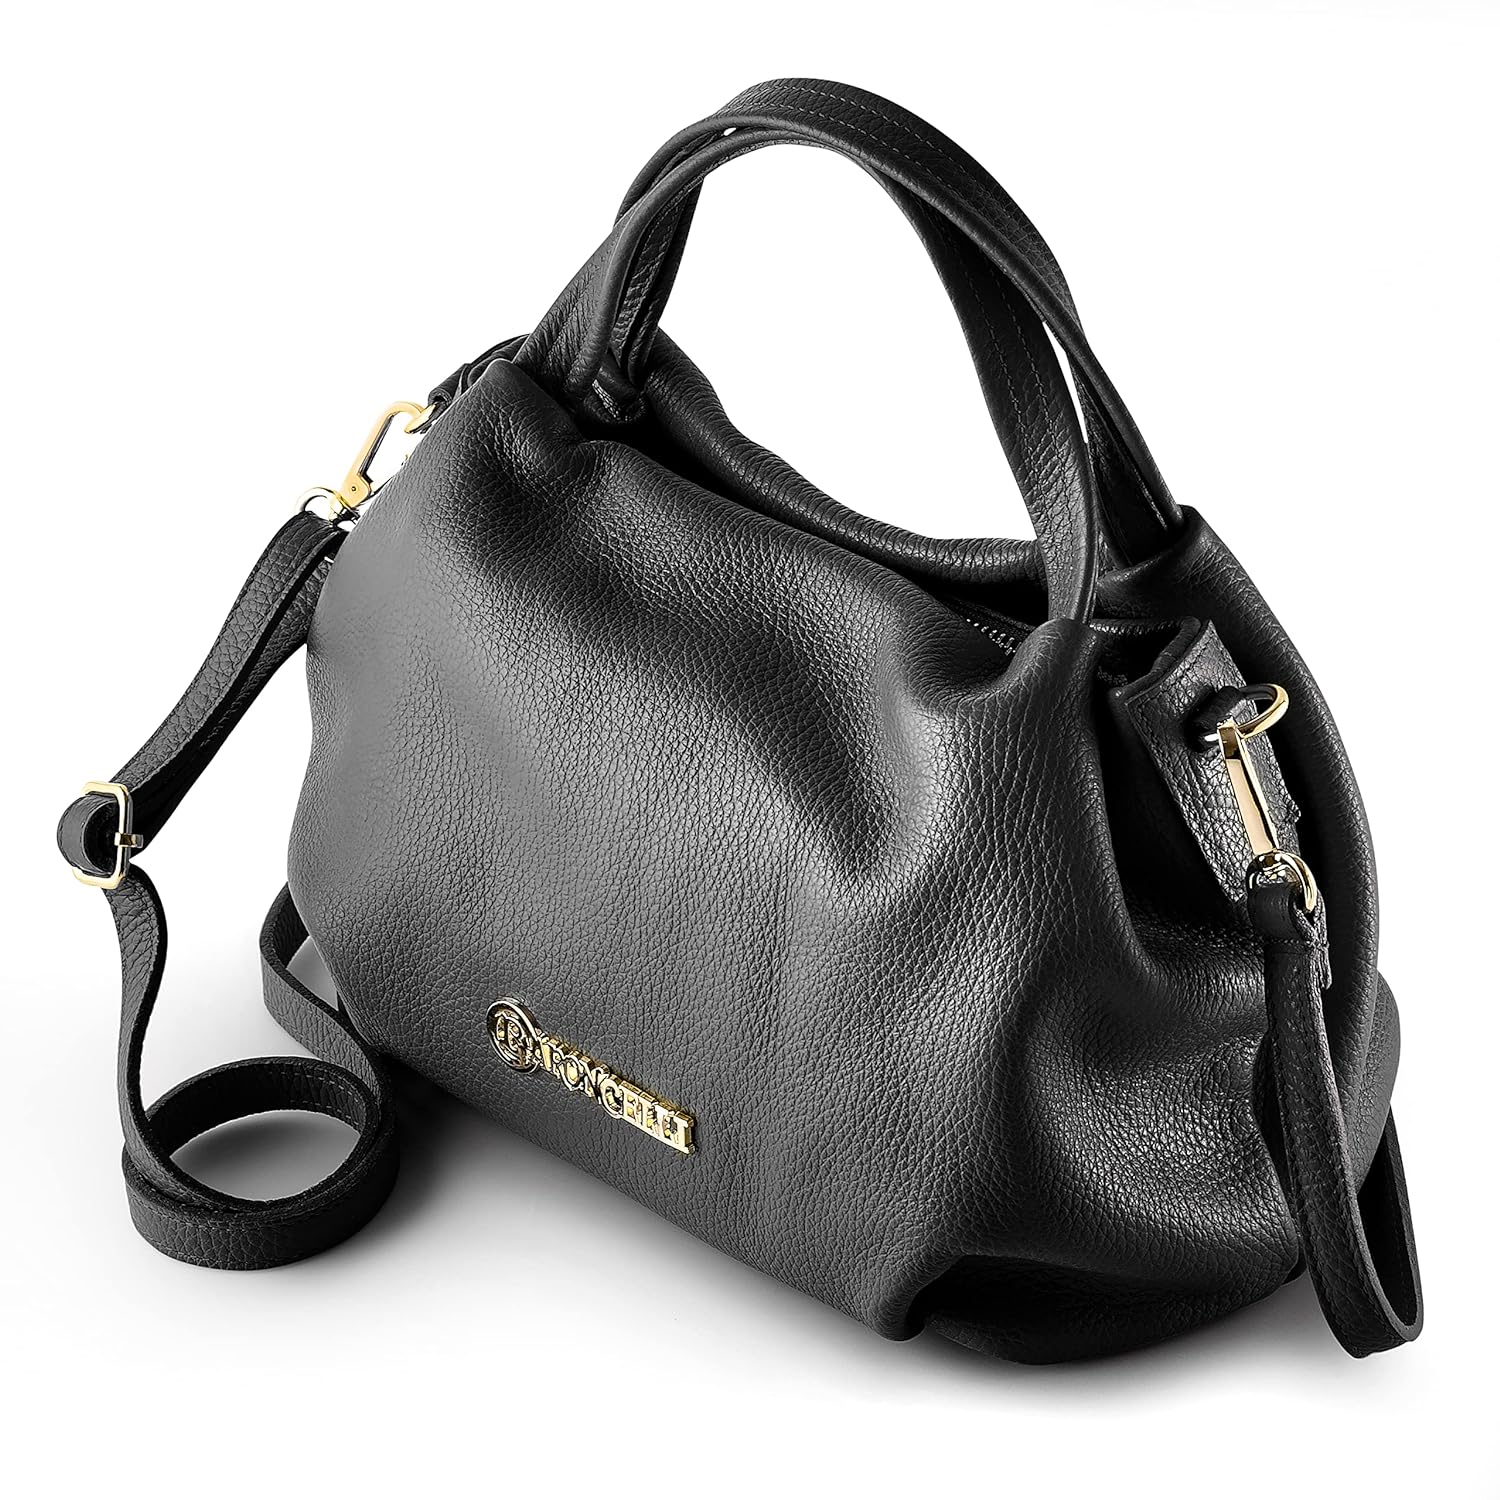 Baroncelli’s Fine Italian Leather Handbags for Women/Exquisite Collection of Classic Cross- Body Bags